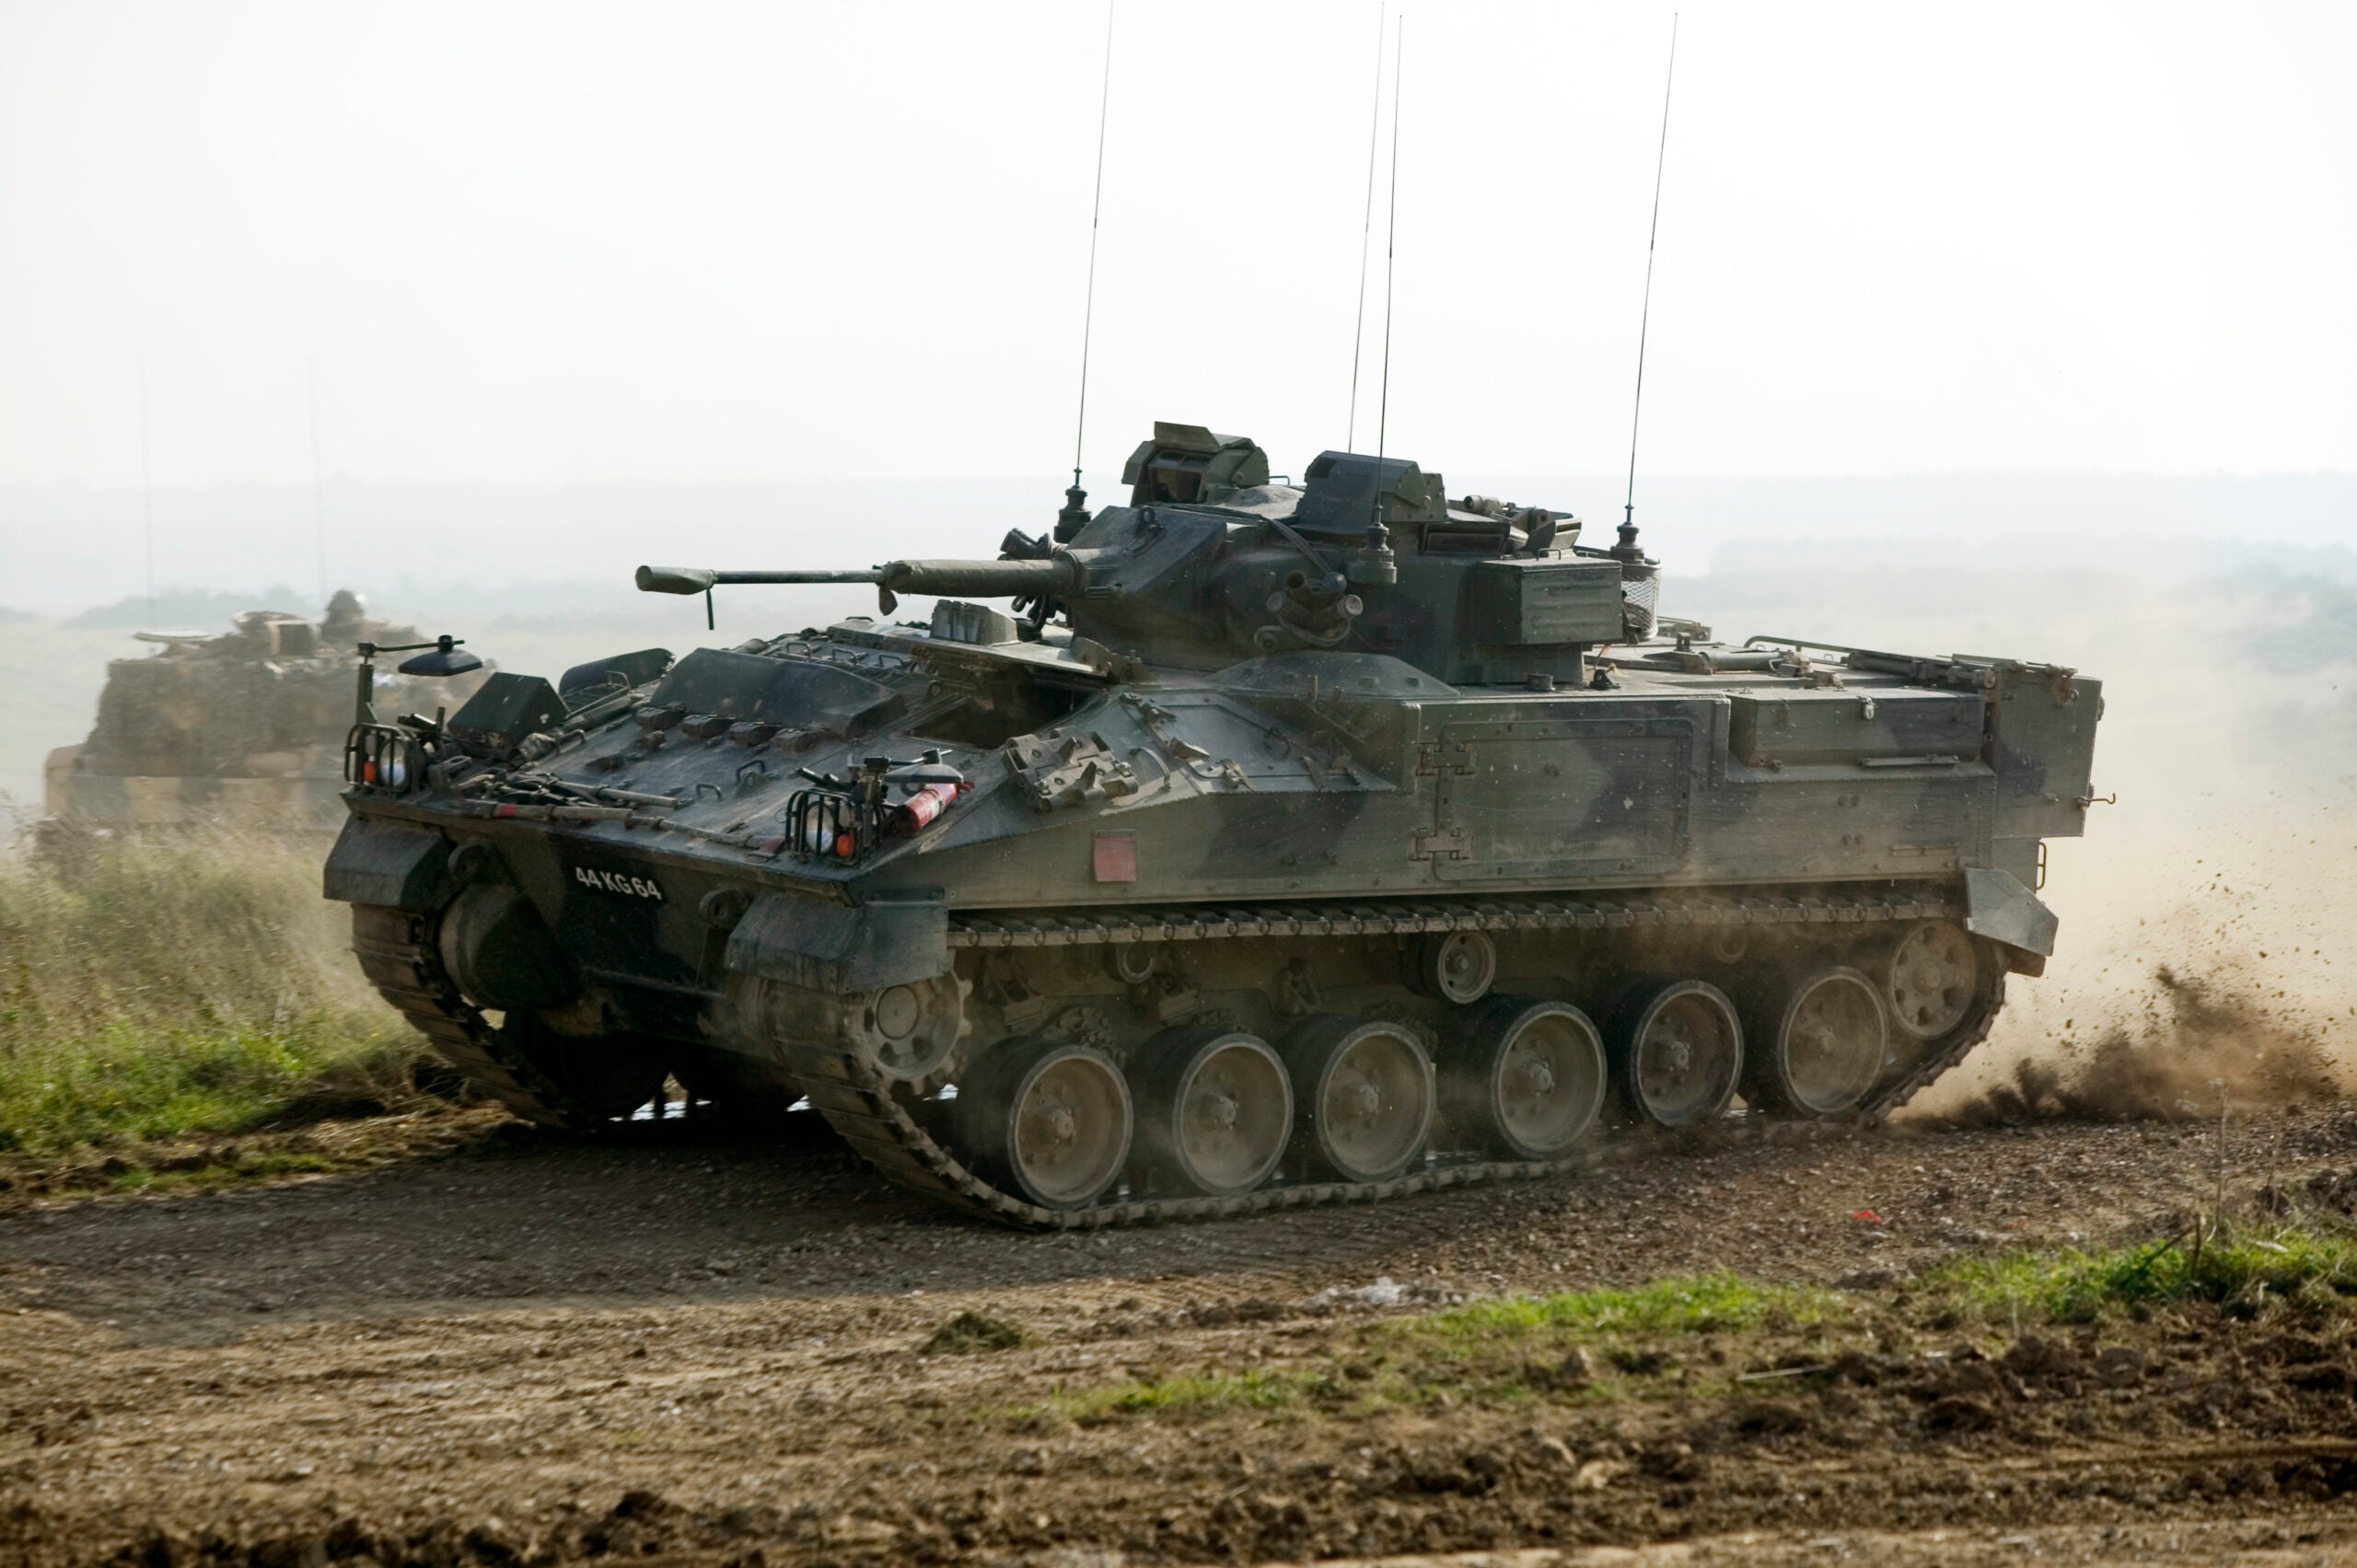 Library Image:
A Warrior Infantry Fighting Vehicle is shown being put through its paces at a Firepower Demonstration at Warminster, Salisbury Plain.  

The Ministry of Defence (MOD) has today awarded a £50m contract to BAE Systems to support the British Armys armoured tracked vehicle fleet, safeguarding 100 jobs.

The five-year contract covers an array of design services including safety advice and elements of operational effectiveness for light, medium and heavy armoured vehicles. 

It also combines a number of existing support contracts into a more efficient and effective contracting agreement saving taxpayers money.